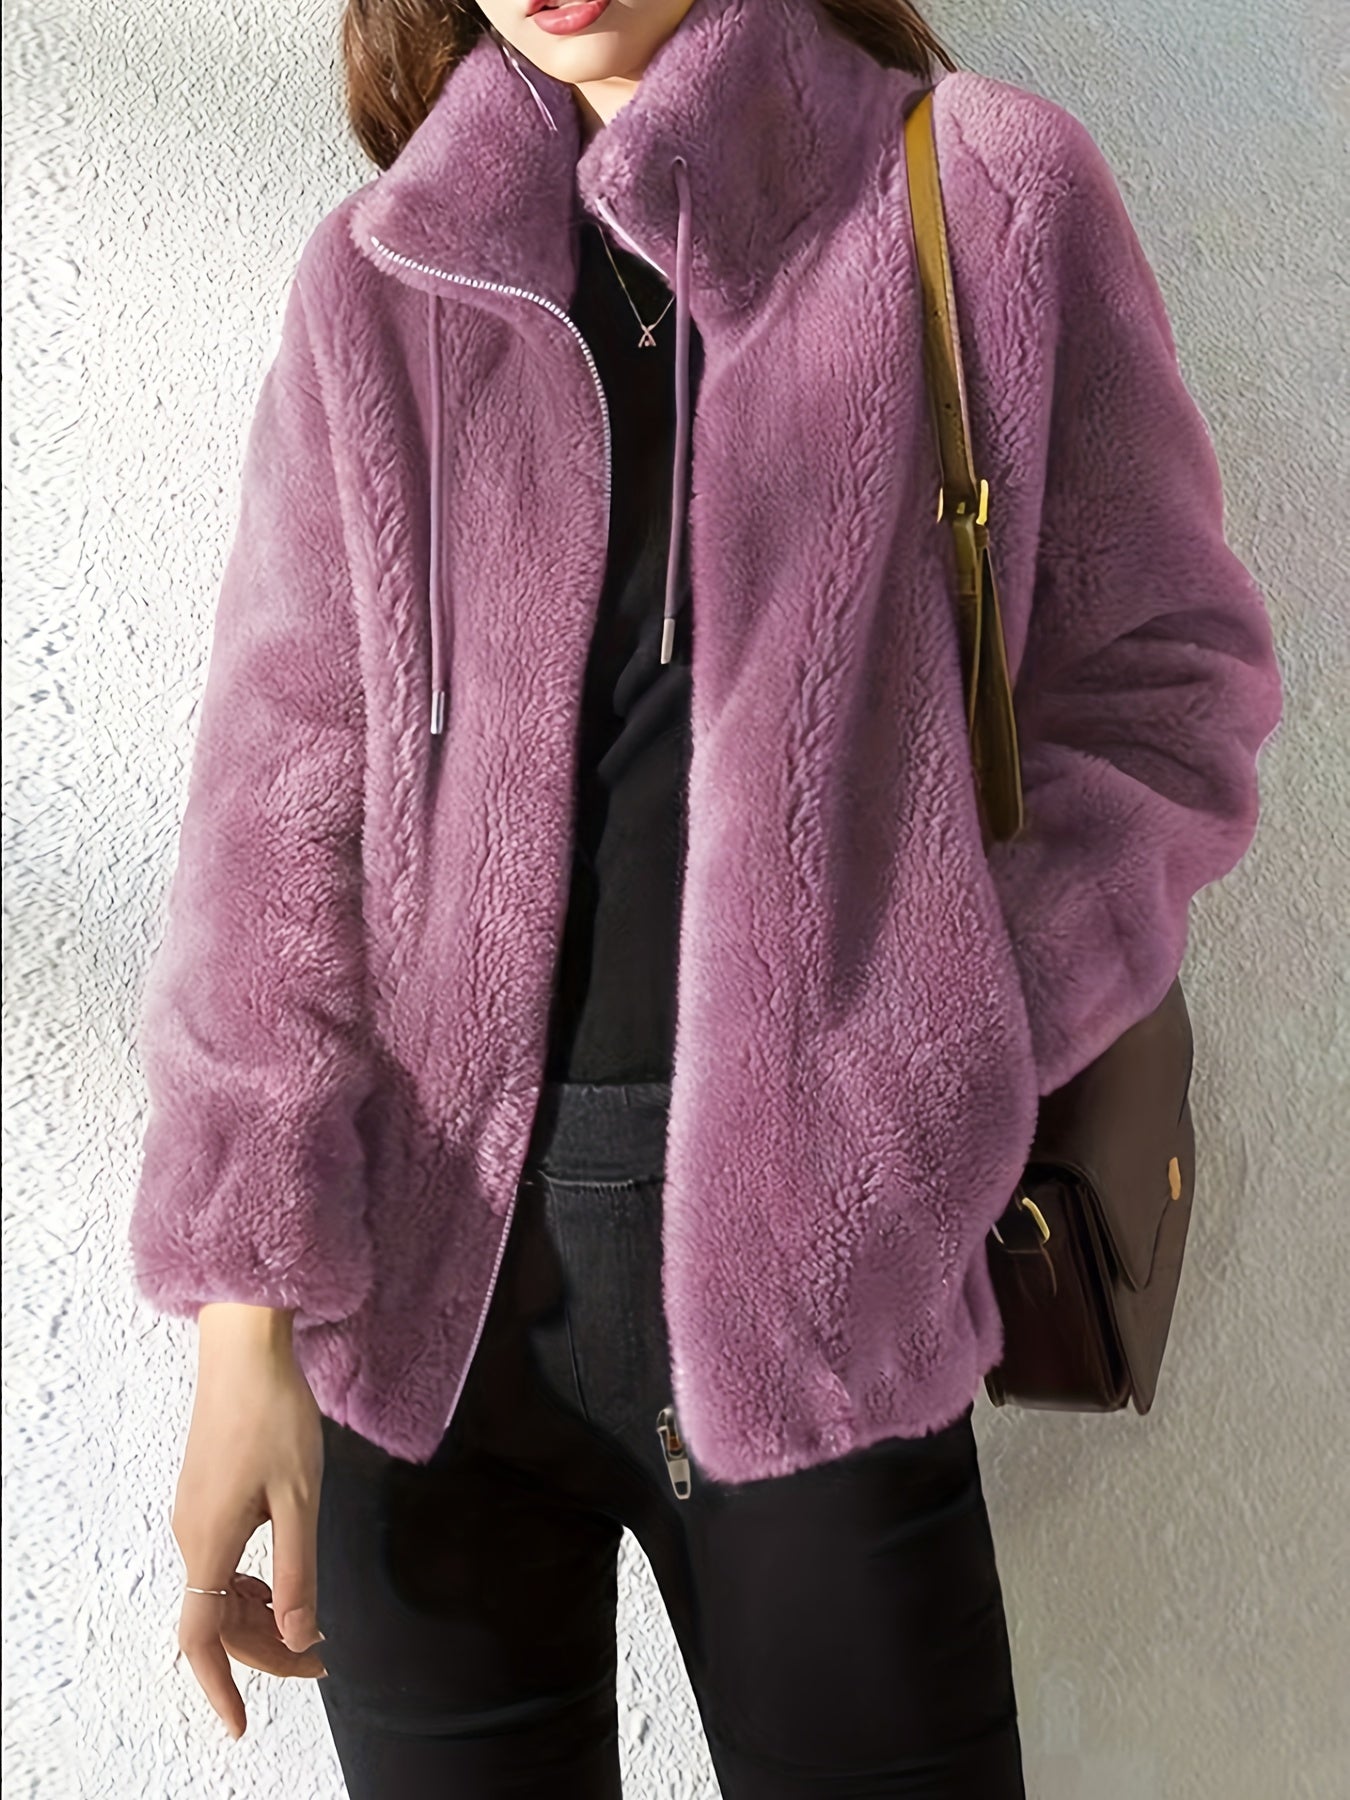 Drawstring Teddy Coat, Casual Zip Up Long Sleeve Warm Outerwear, Women's Clothing